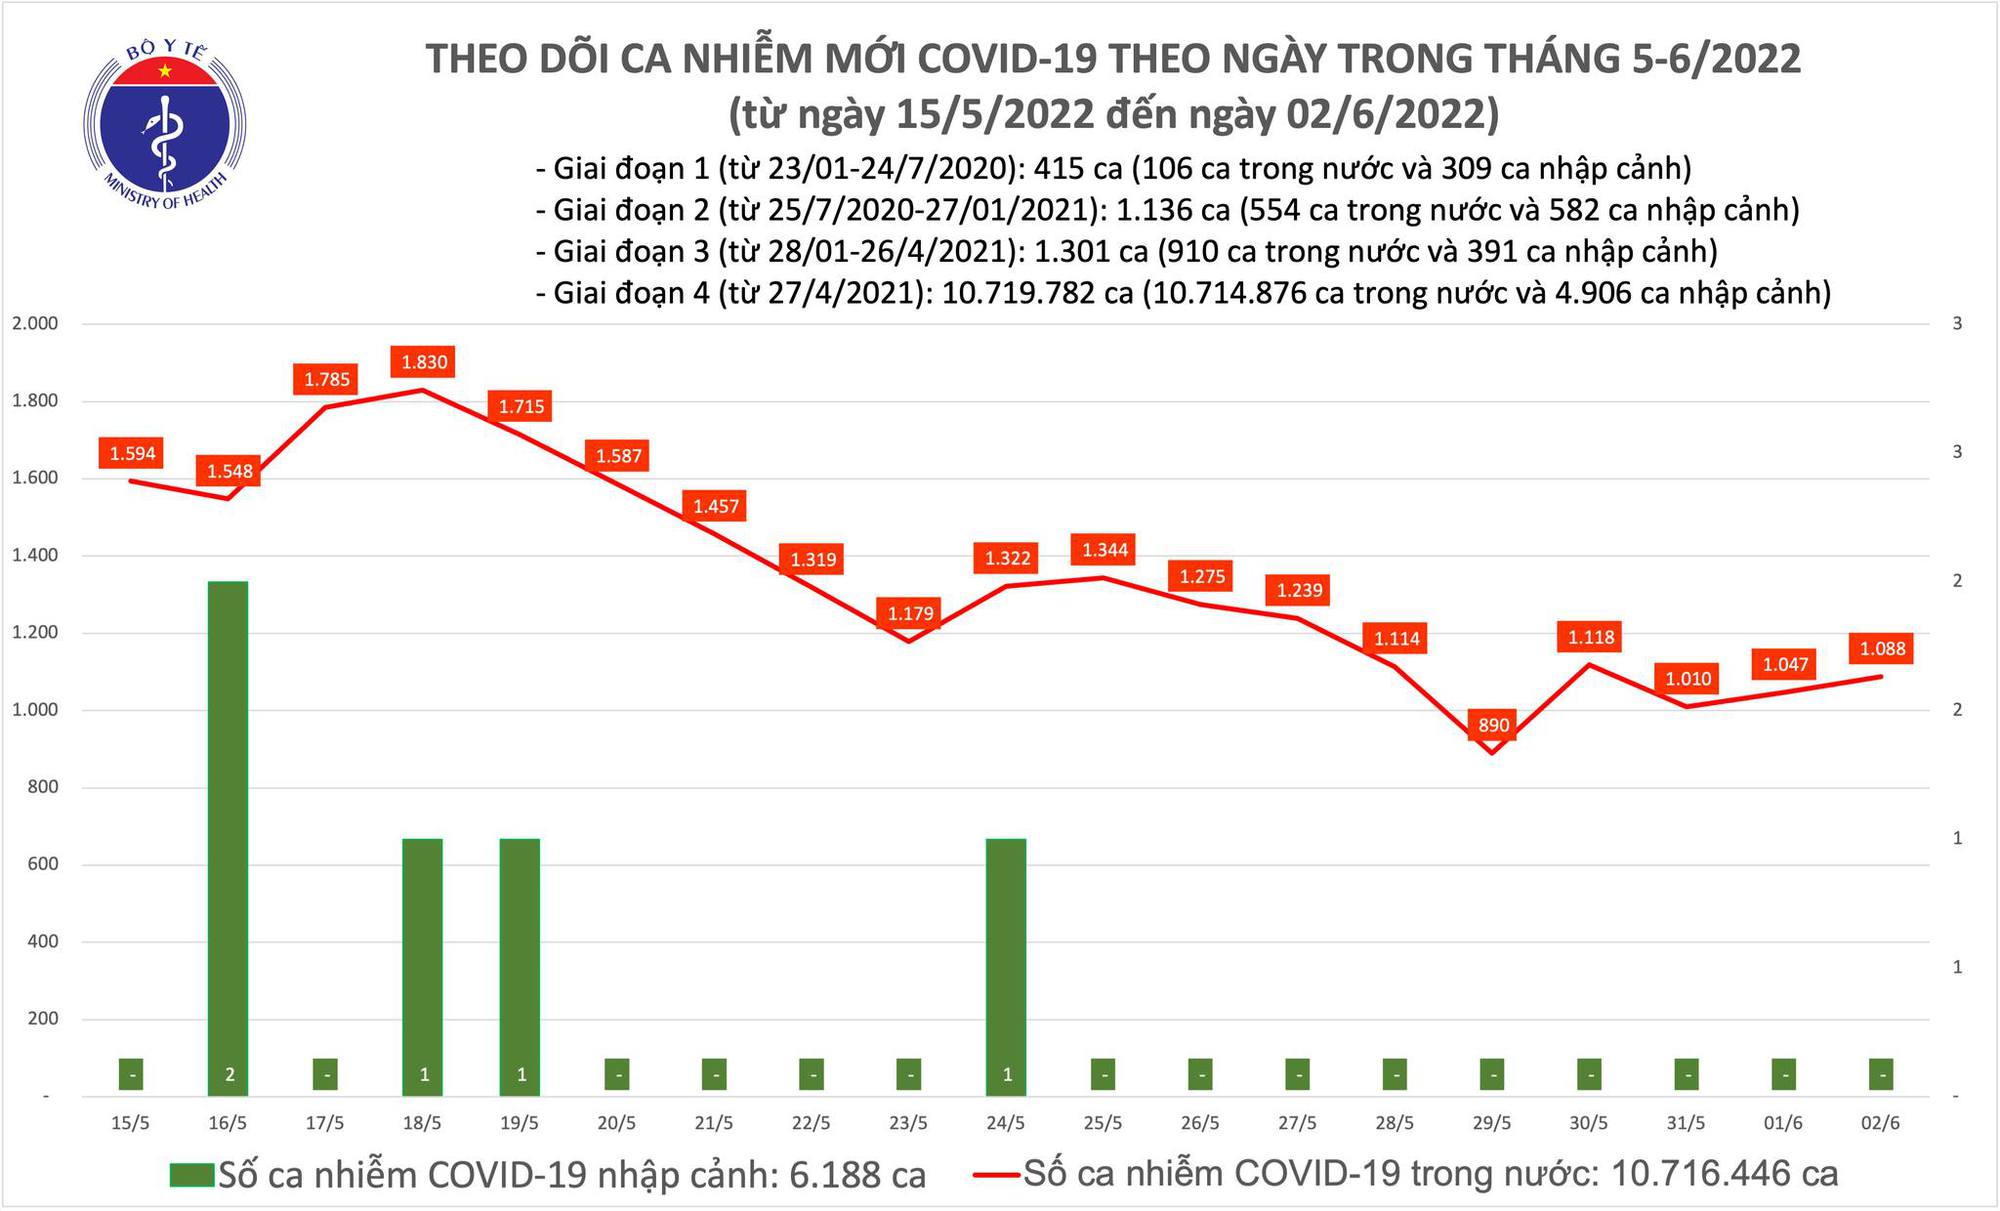 Covid-19 on June 2: More than 1,000 new cases were recorded - Photo 1.